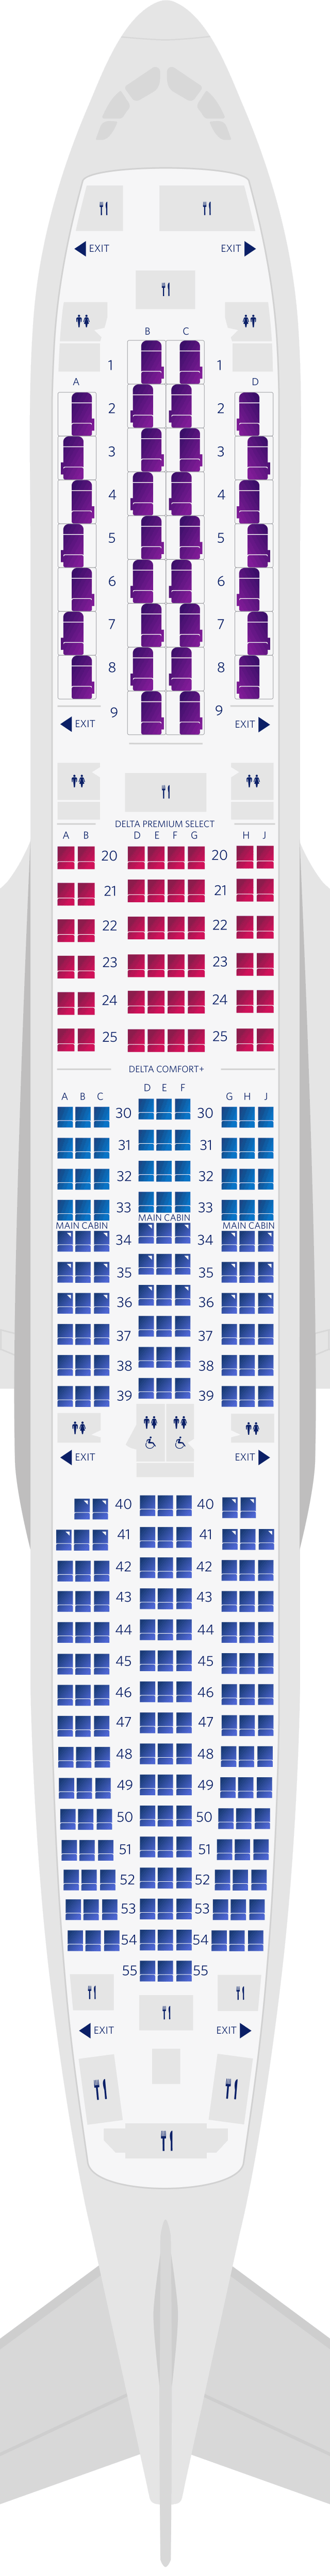 Airbus A350-900 Seat Maps, Specs & Amenities | Delta Air Lines